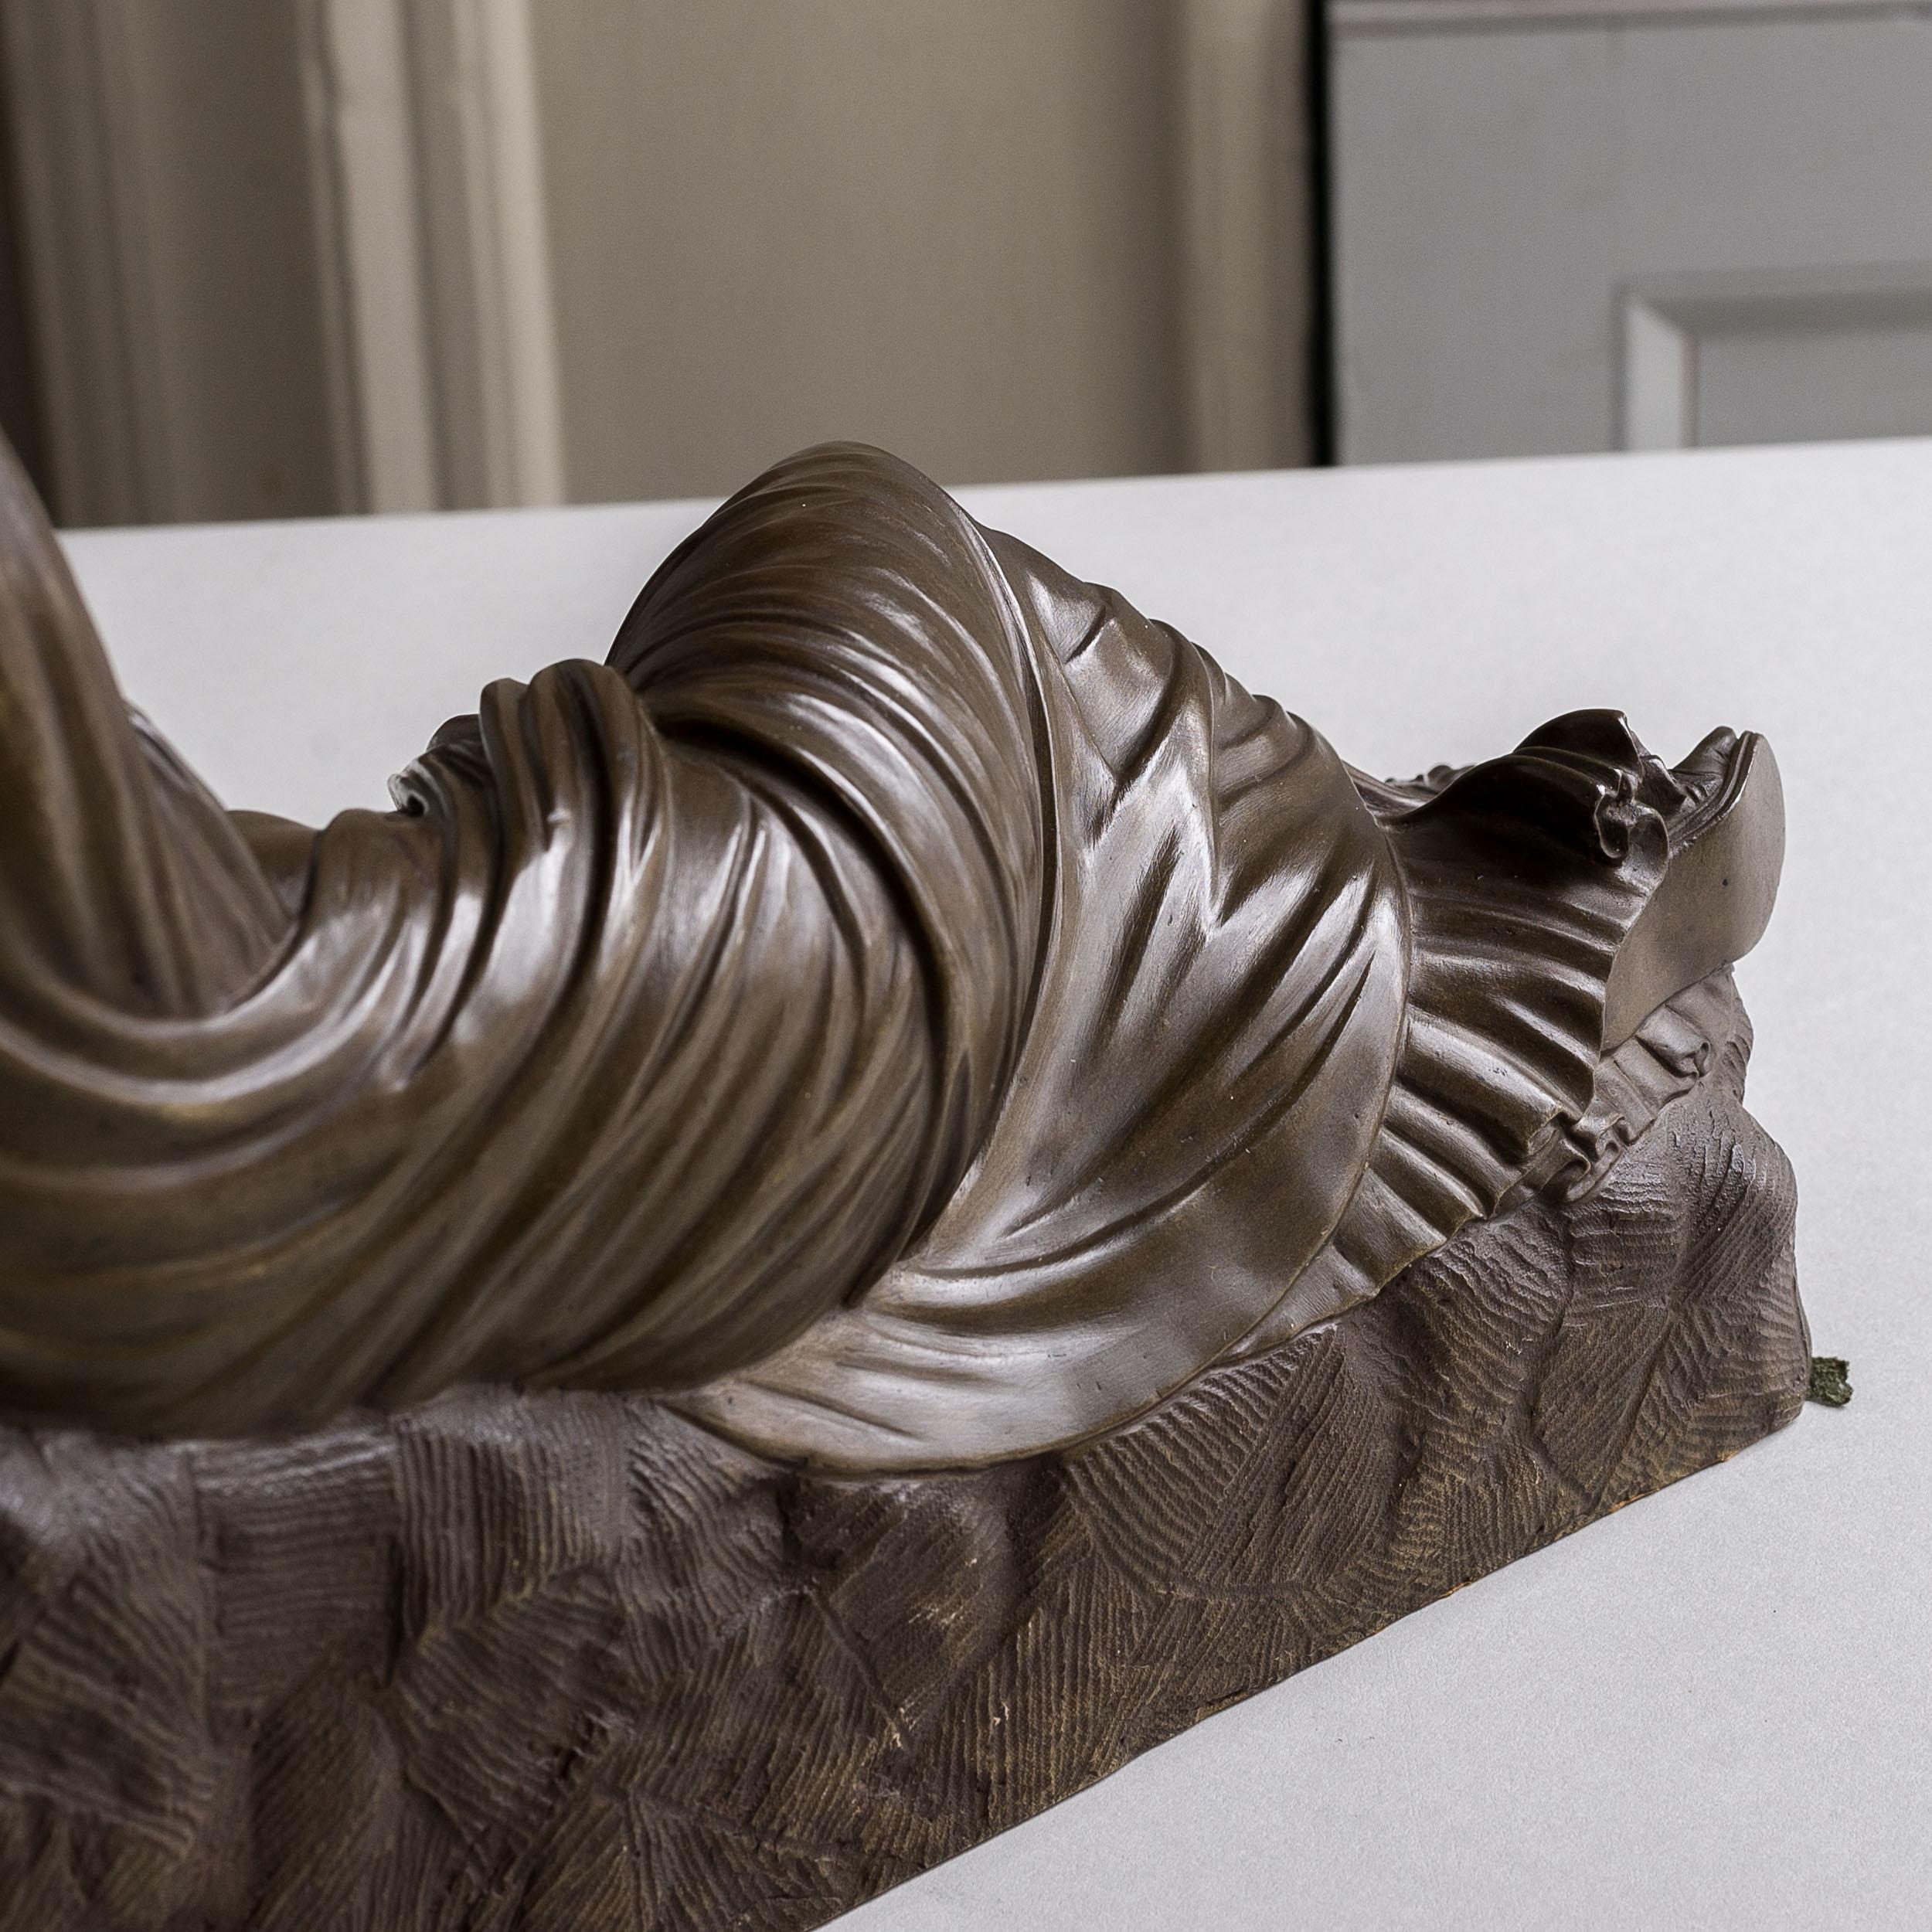 Nineteenth Century French Bronze of the Sleeping Ariadne For Sale 3